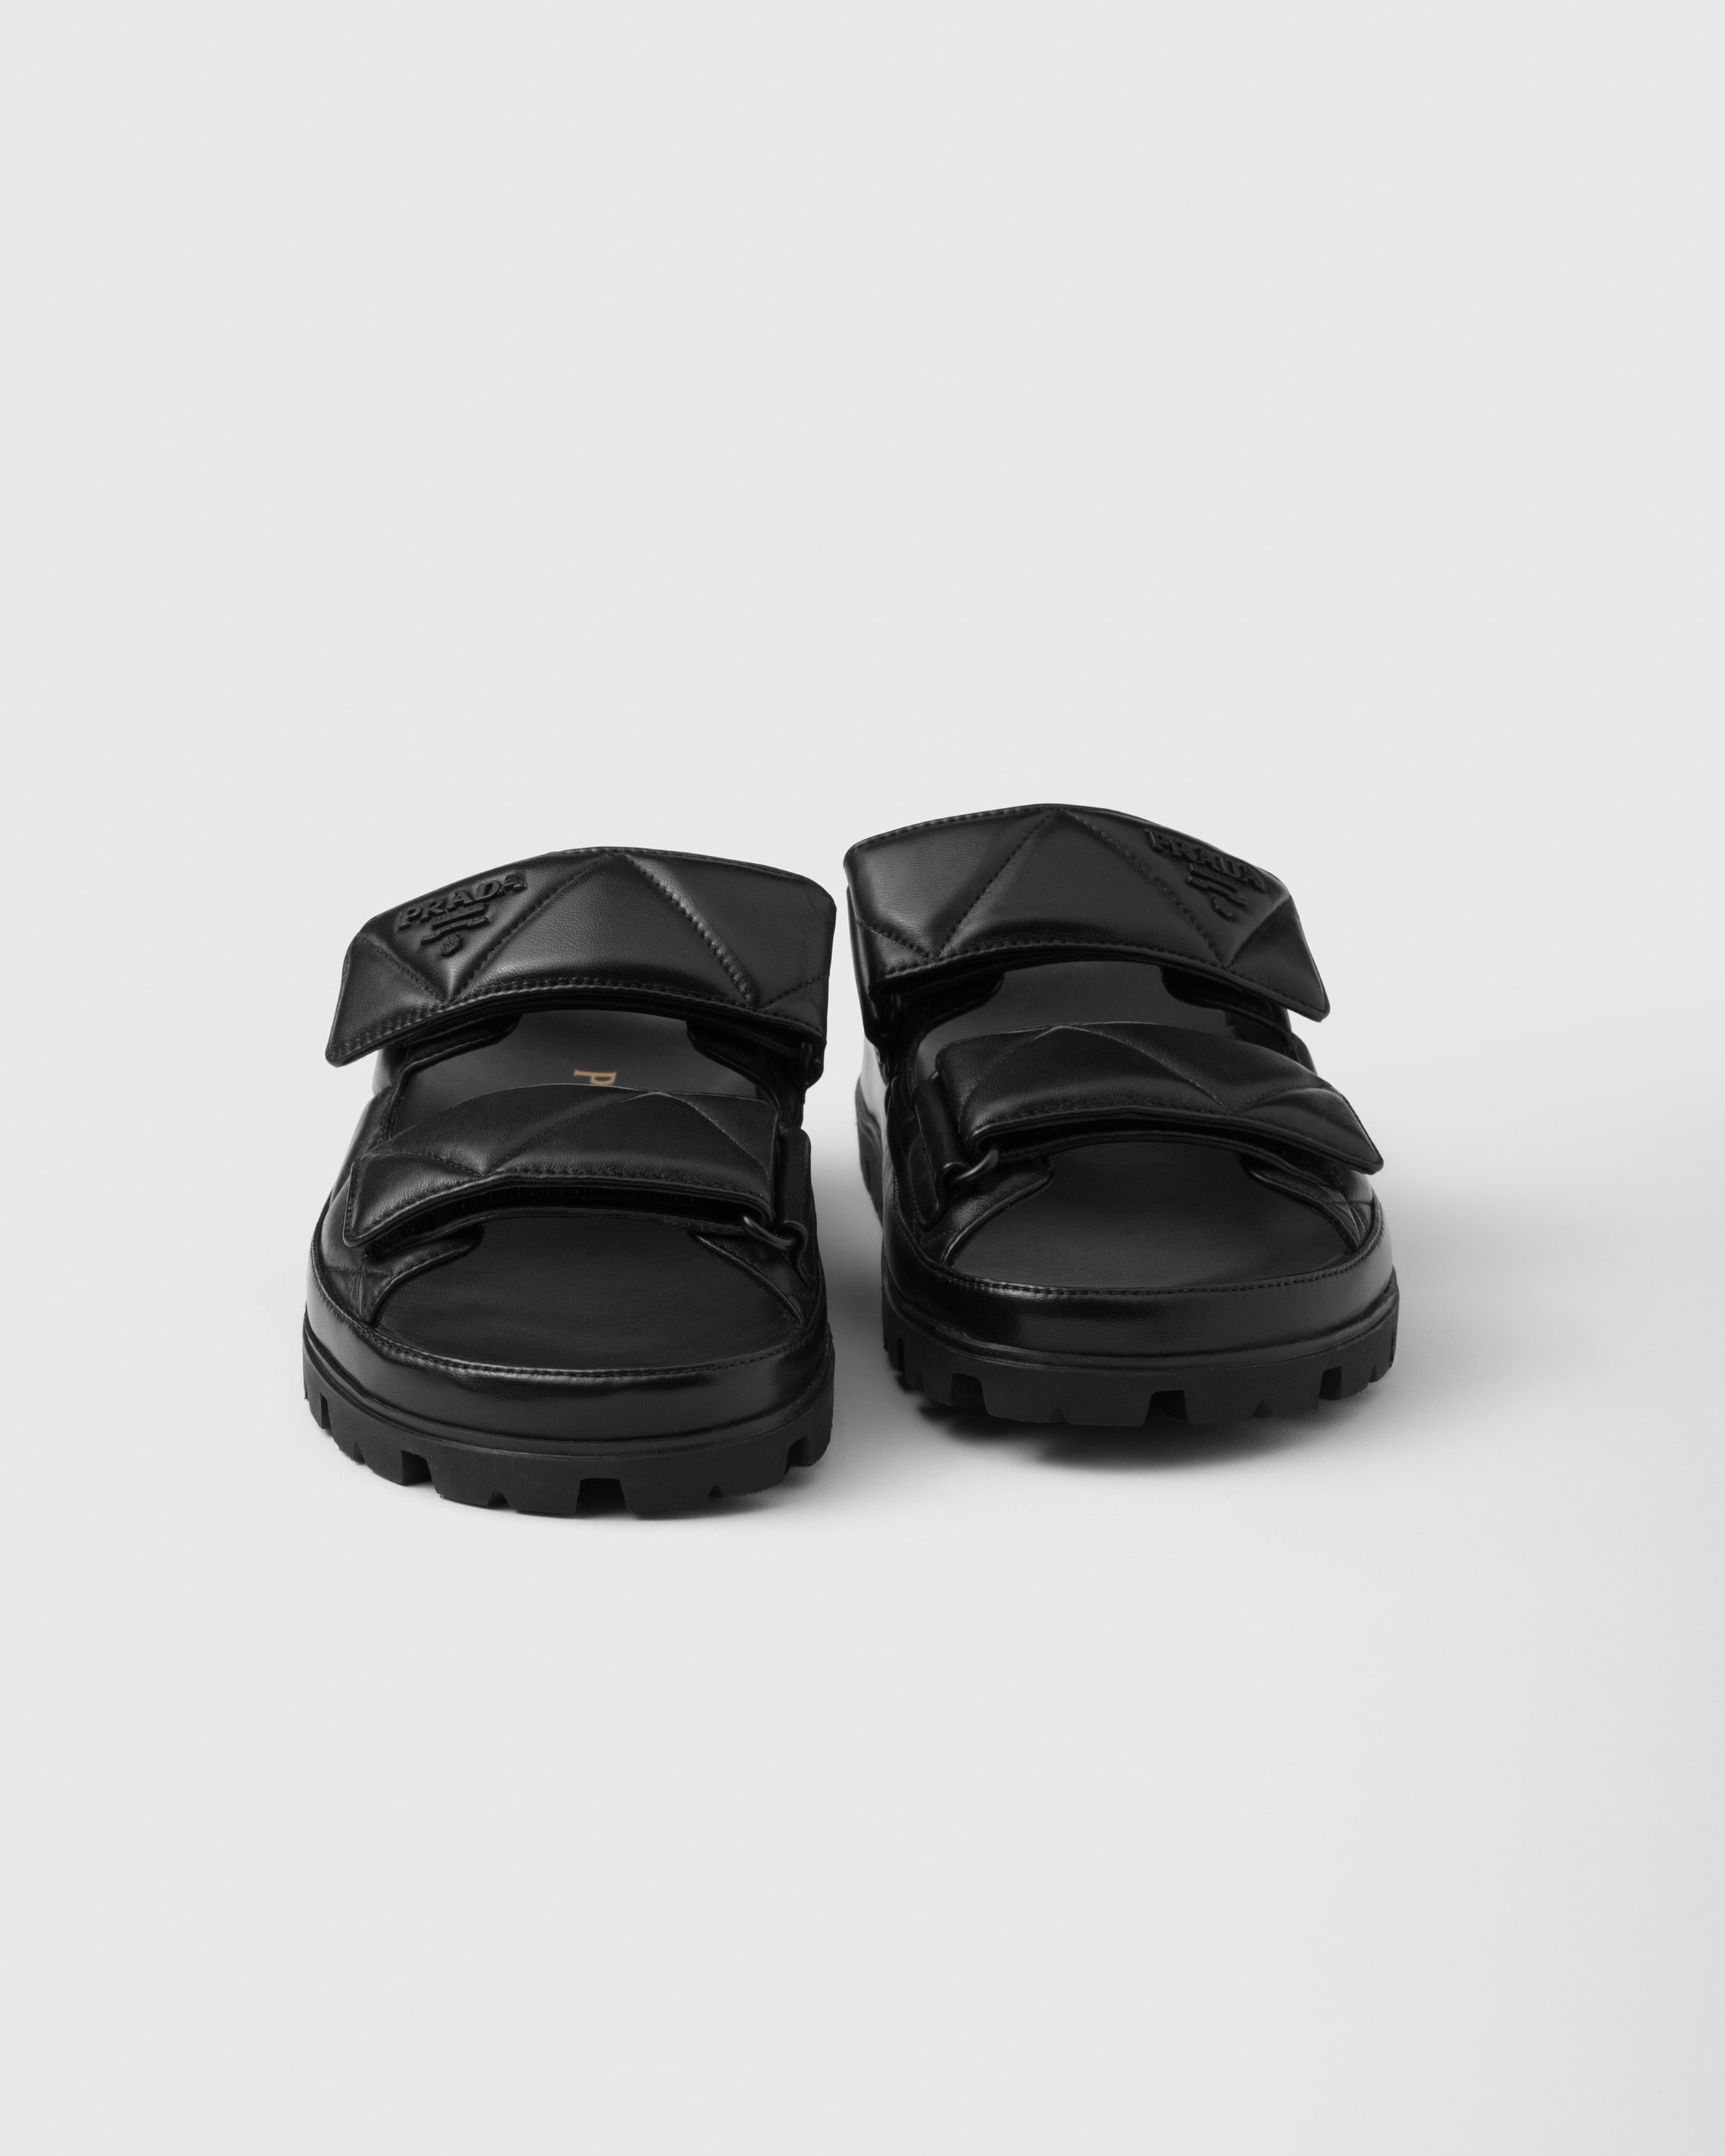 Padded nappa leather sandals - 5